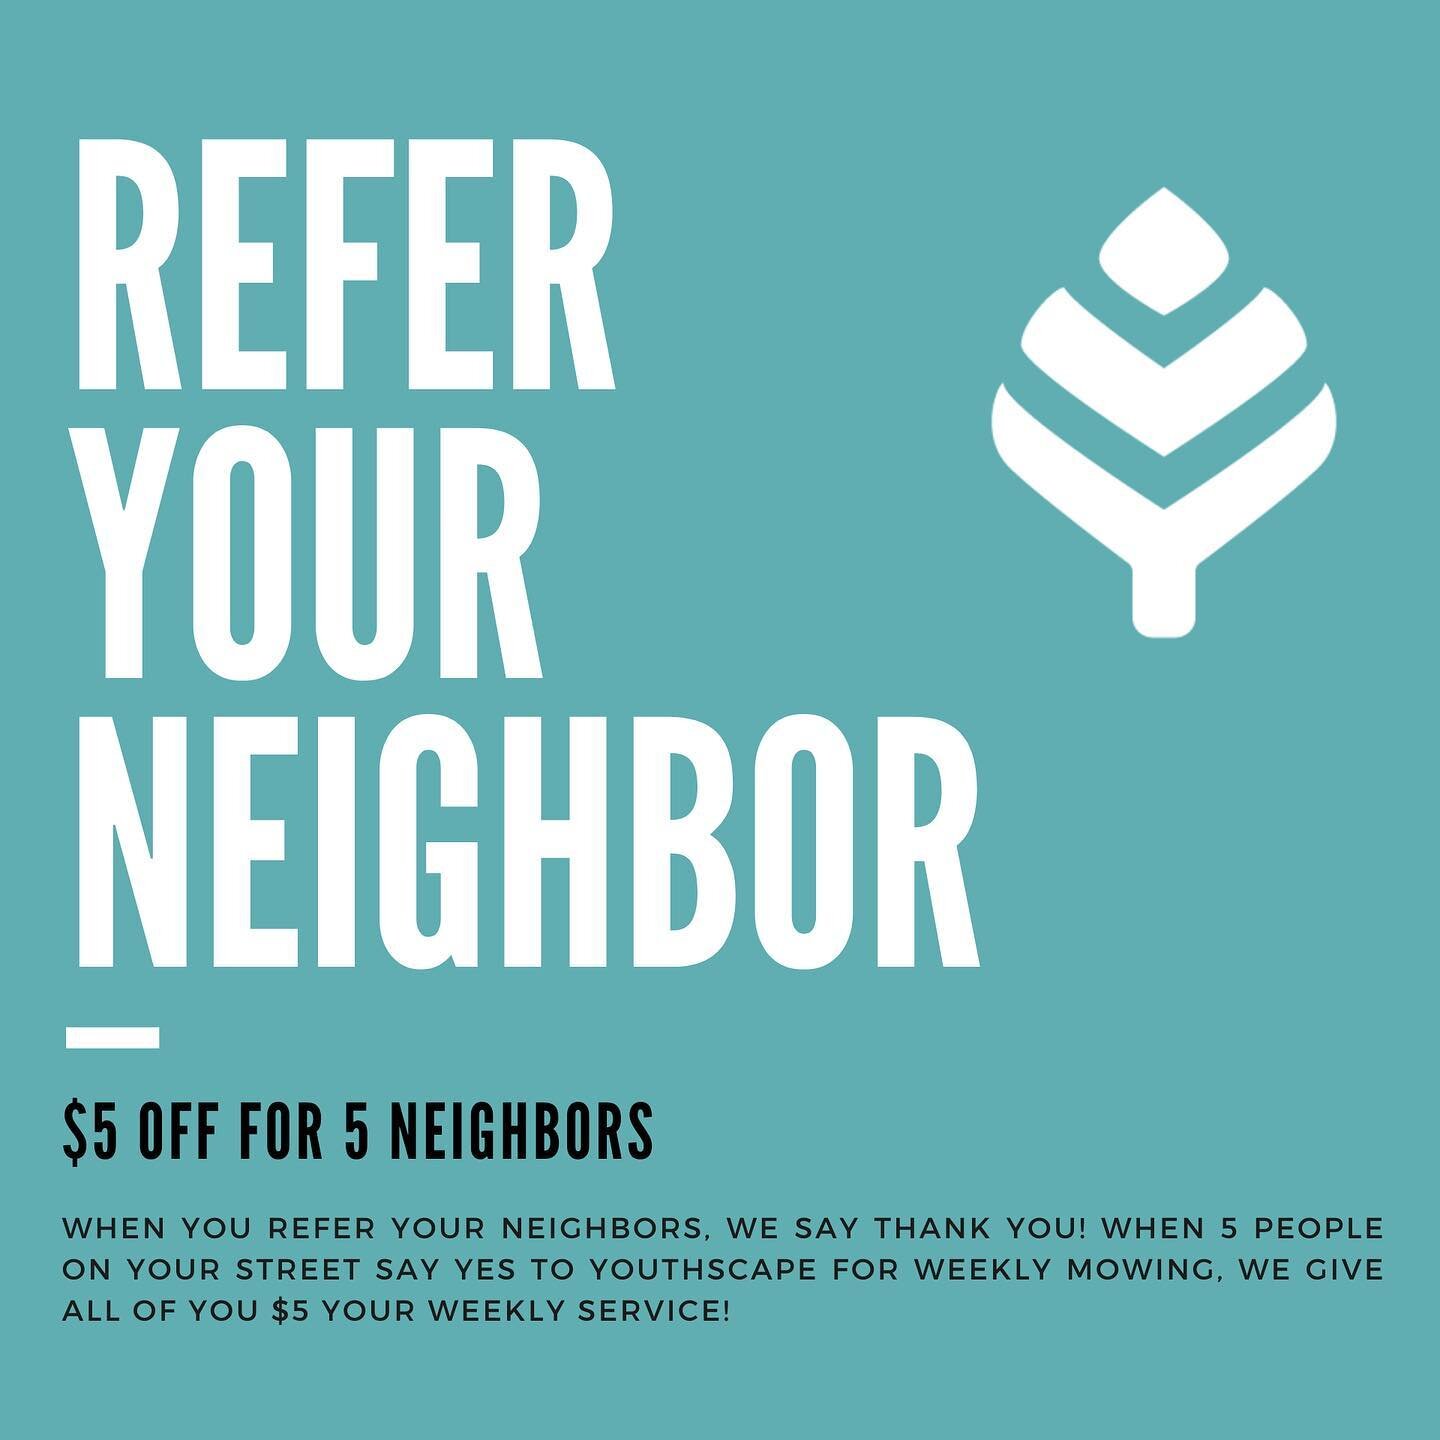 ☀️ Summer is here! Refer your neighbors for weekly mowing today and all 5 of you will receive a $5 discount to your weekly service! Refer your neighbors and we will reward you all! 
-
#fortcollinscolorado #greeleycolorado #landscaping #landscapingcol